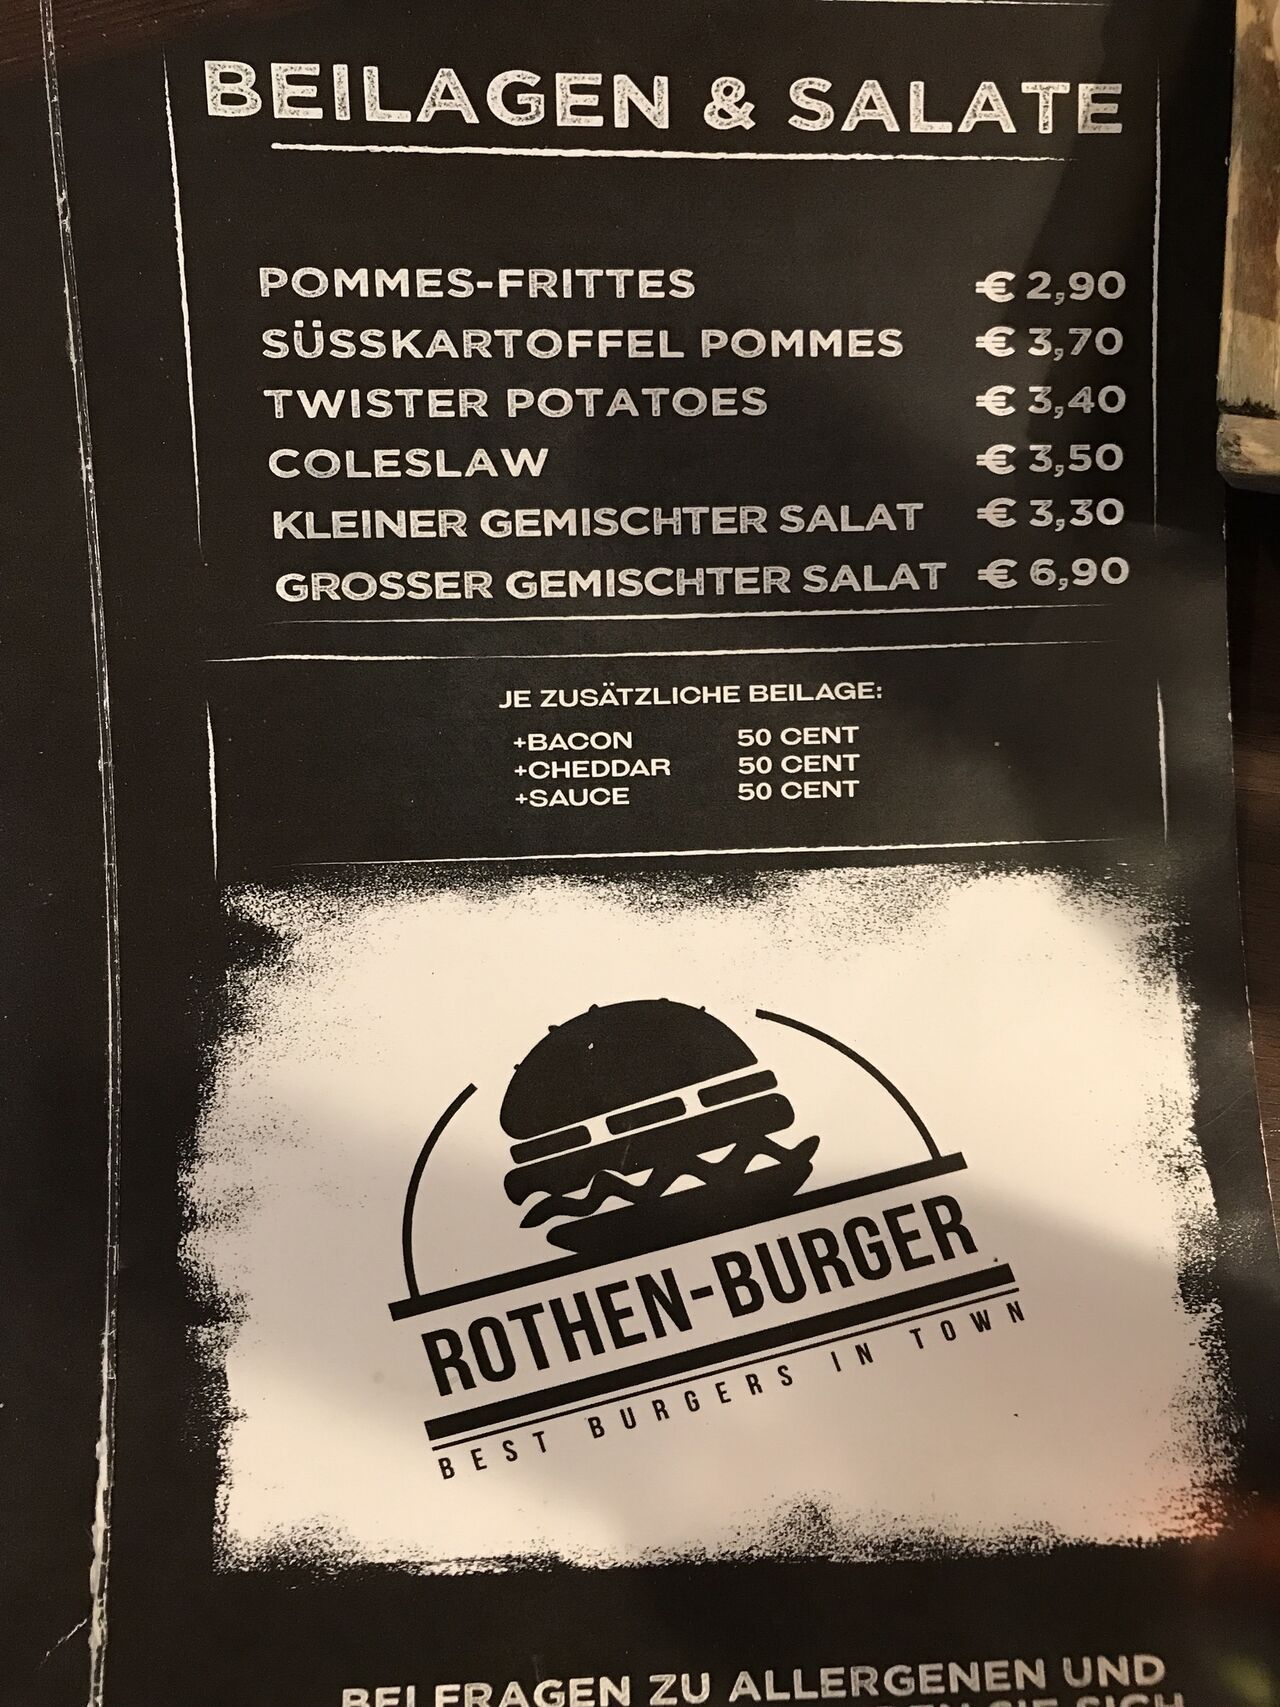 A photo of Rothen-Burger